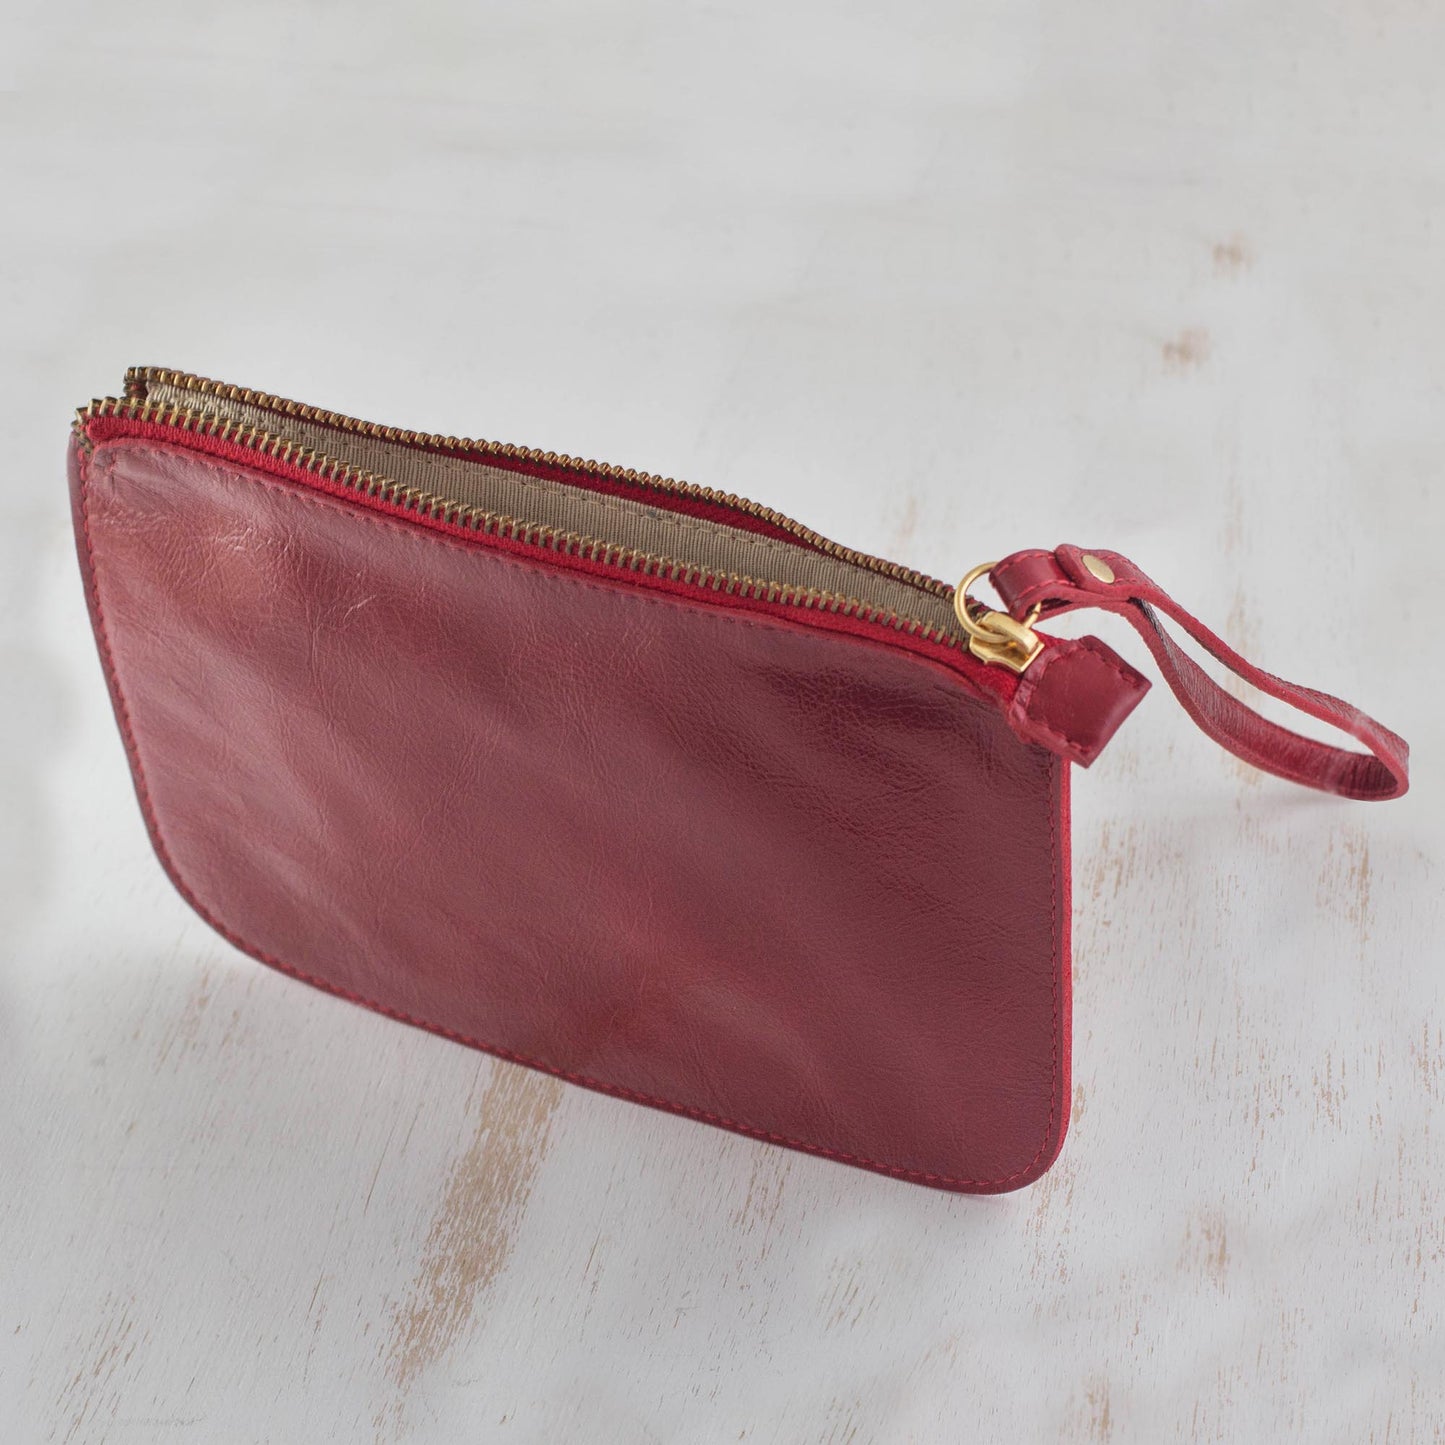 Trendy Fashion in Cherry Handmade Cherry Leather Wristlet from Brazil